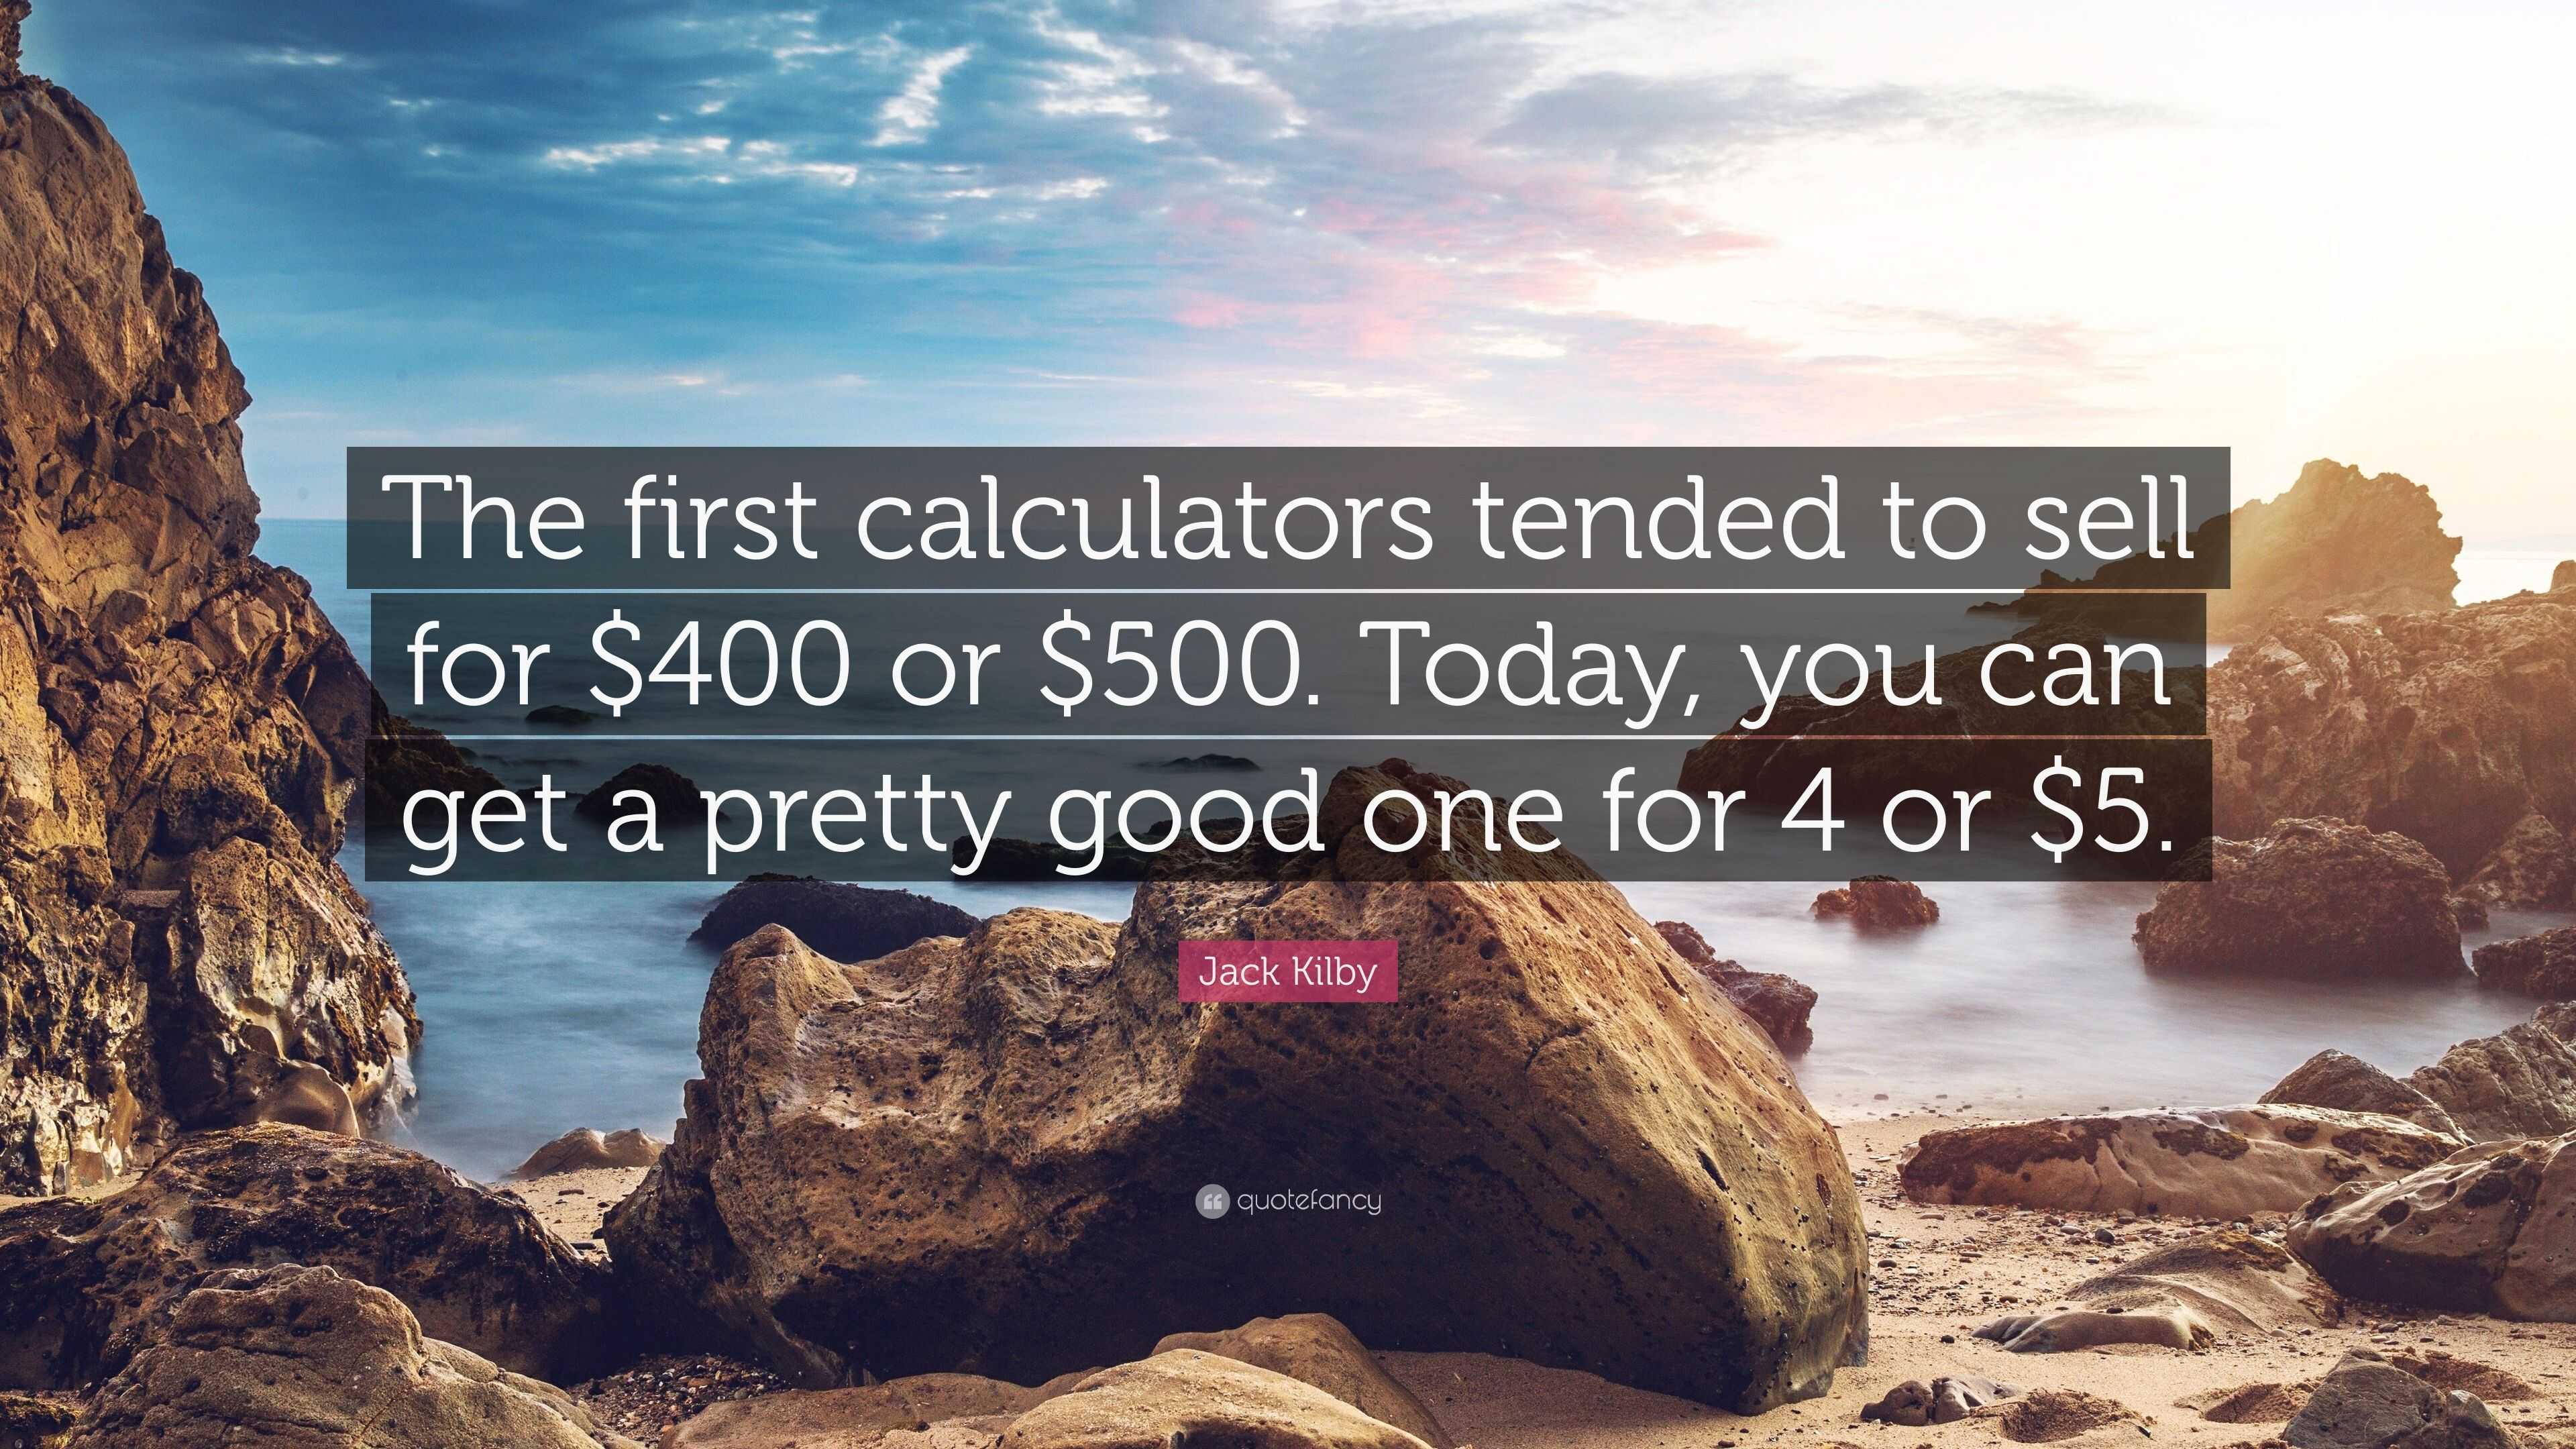 Jack Kilby Quote: “The first calculators tended to sell for $400 or $500.  Today, you can